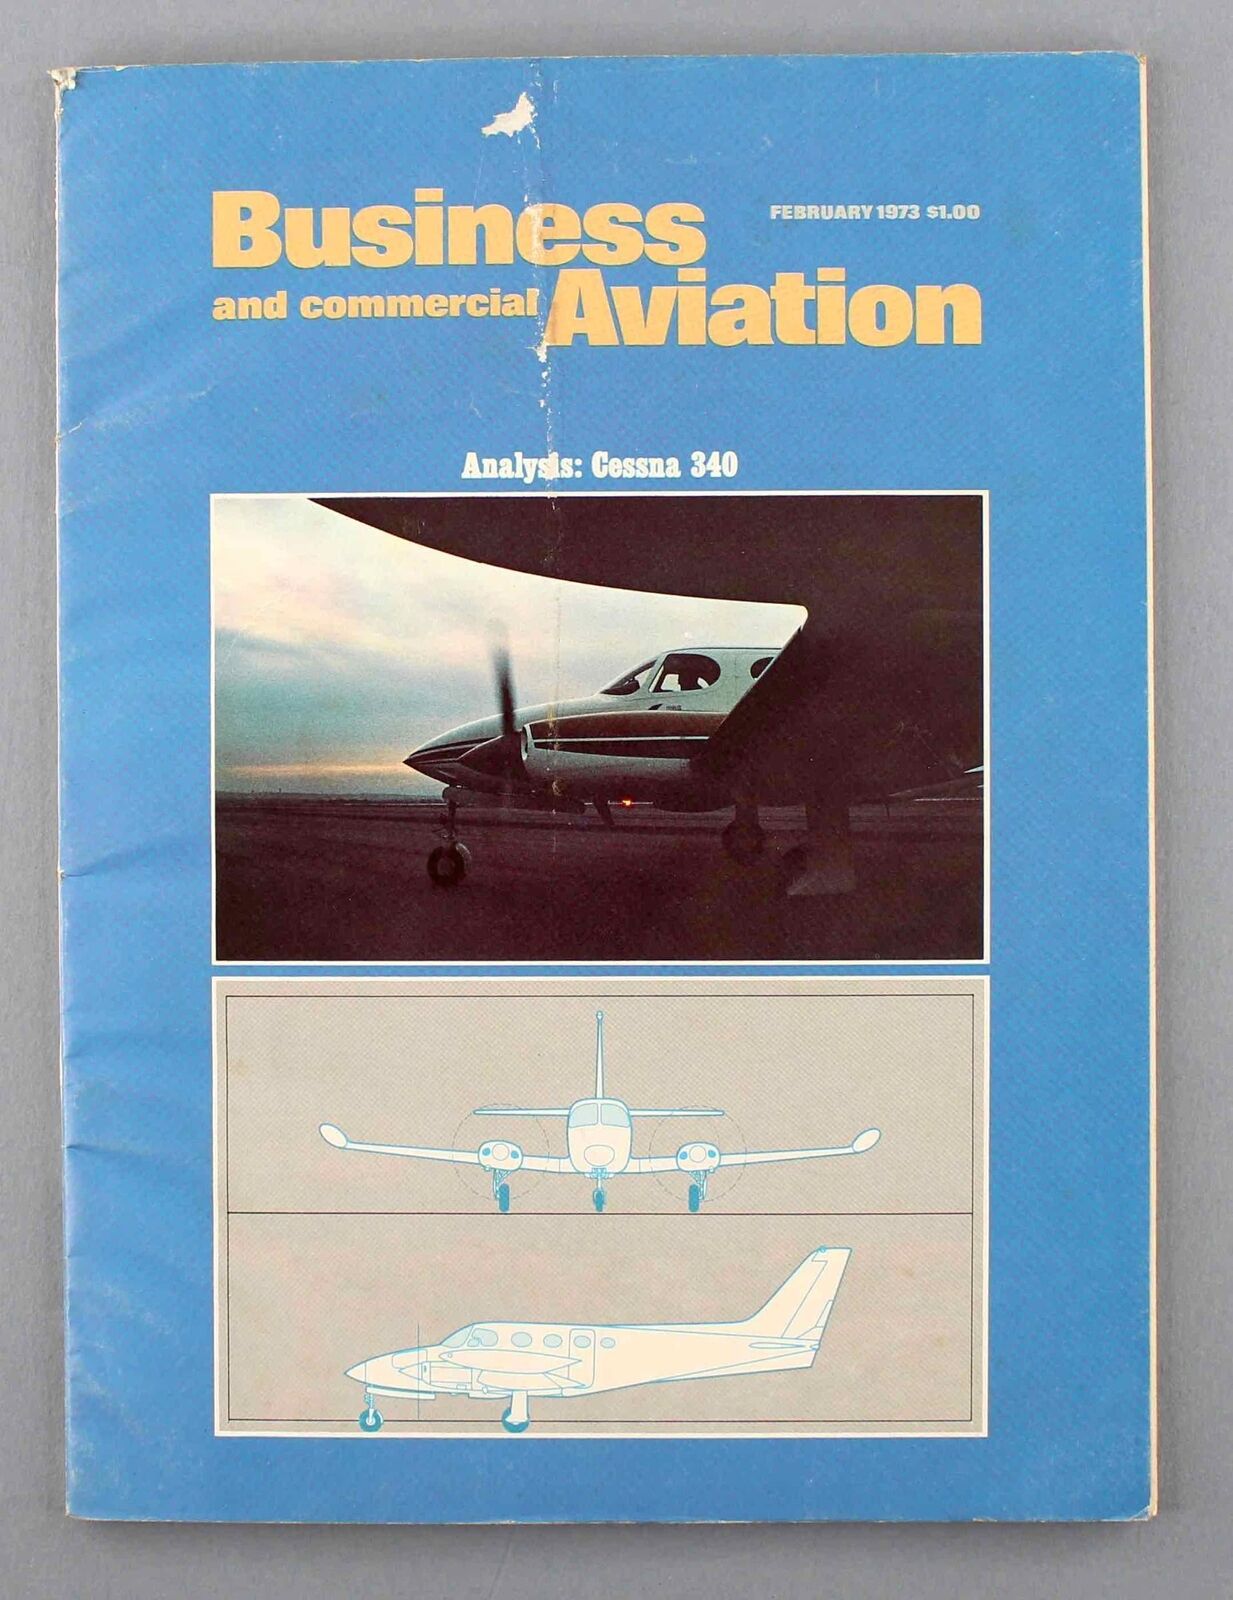 CESSNA 340 ANALYSIS BUSINESS AND COMMERCIAL AVIATION FEBRUARY 1973 MAGAZINE